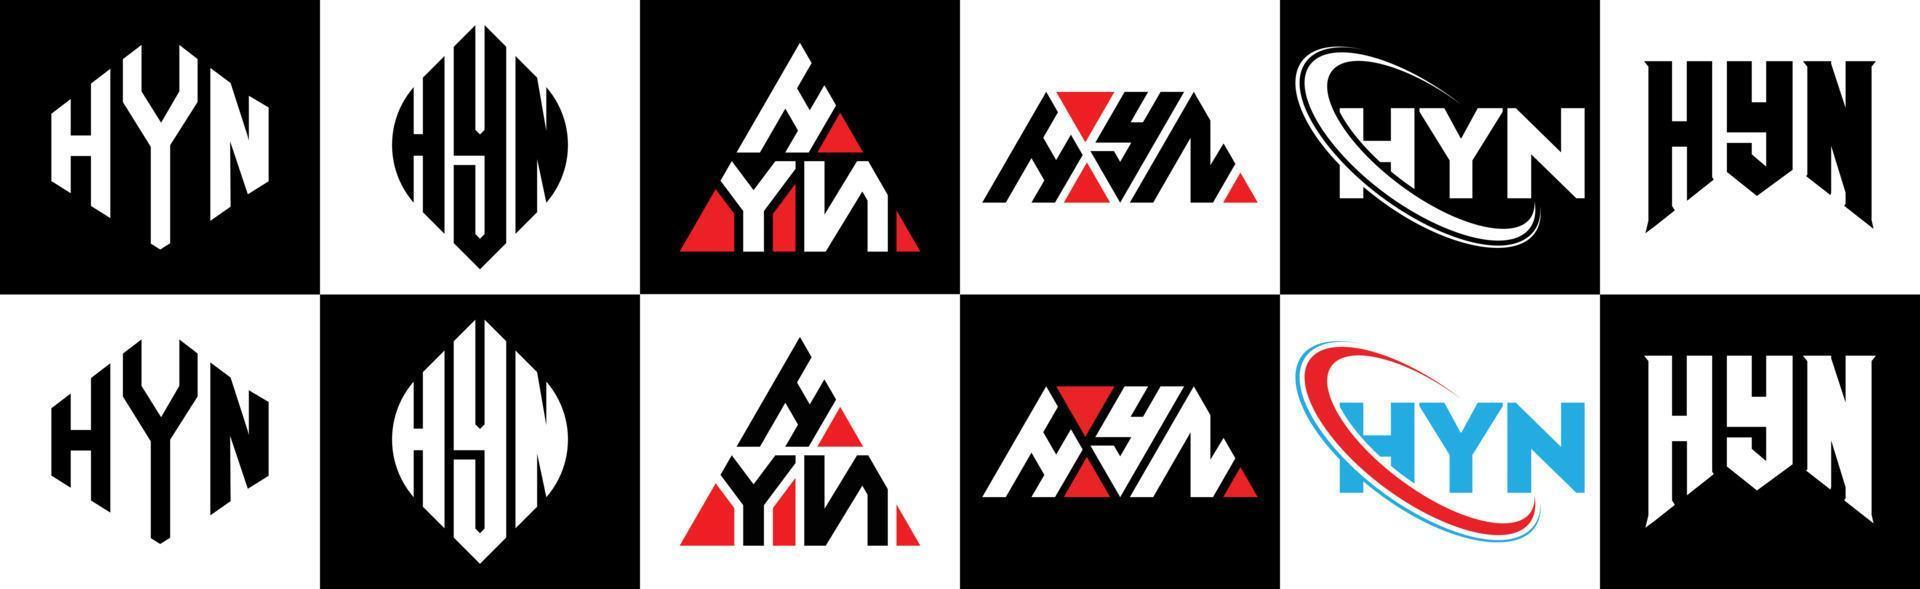 HYN letter logo design in six style. HYN polygon, circle, triangle, hexagon, flat and simple style with black and white color variation letter logo set in one artboard. HYN minimalist and classic logo vector